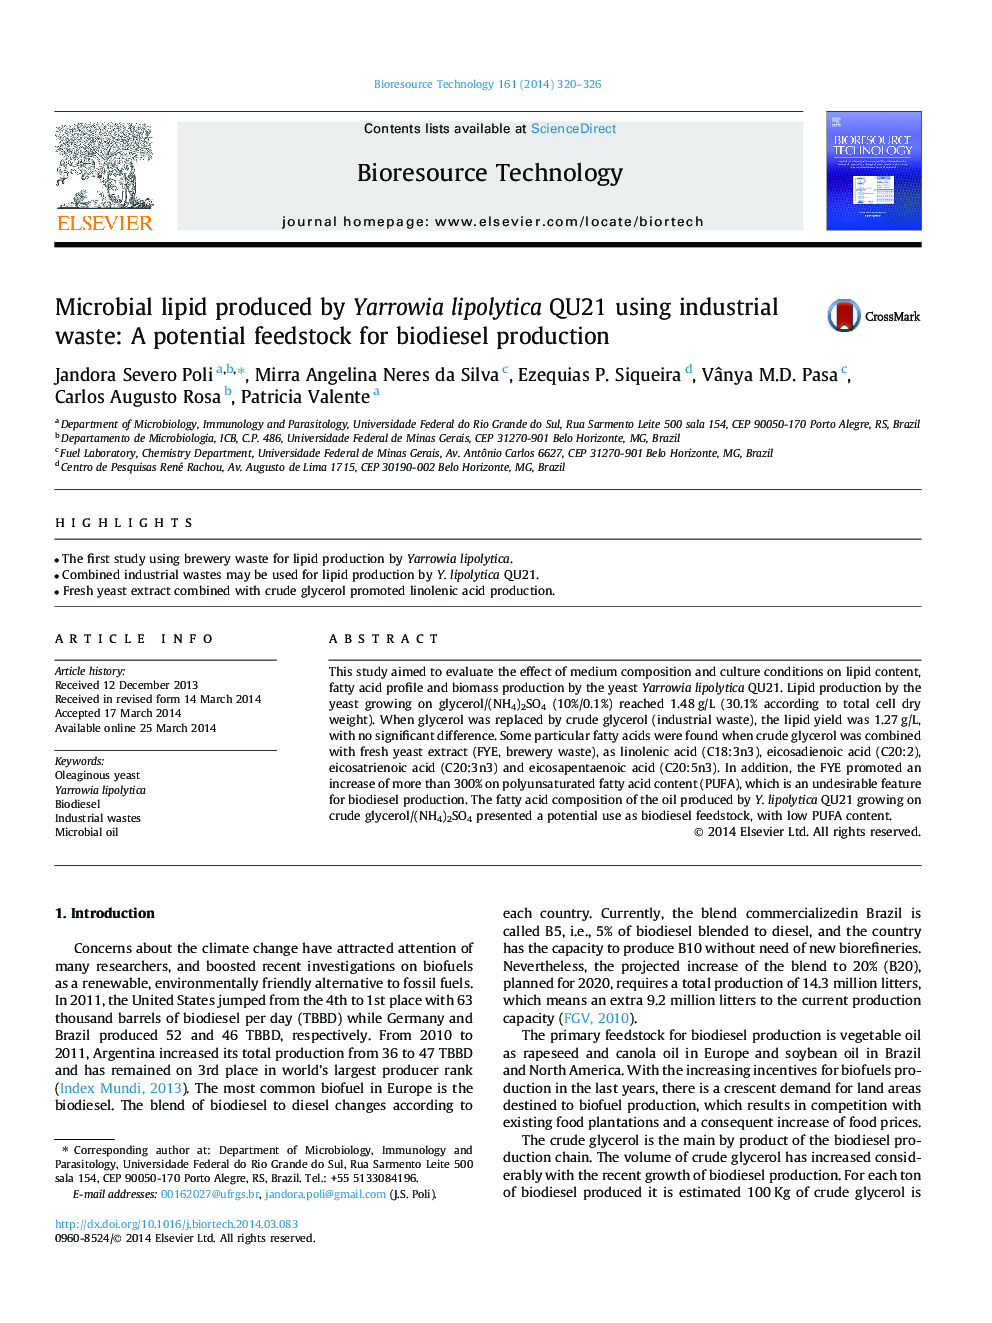 Microbial lipid produced by Yarrowia lipolytica QU21 using industrial waste: A potential feedstock for biodiesel production